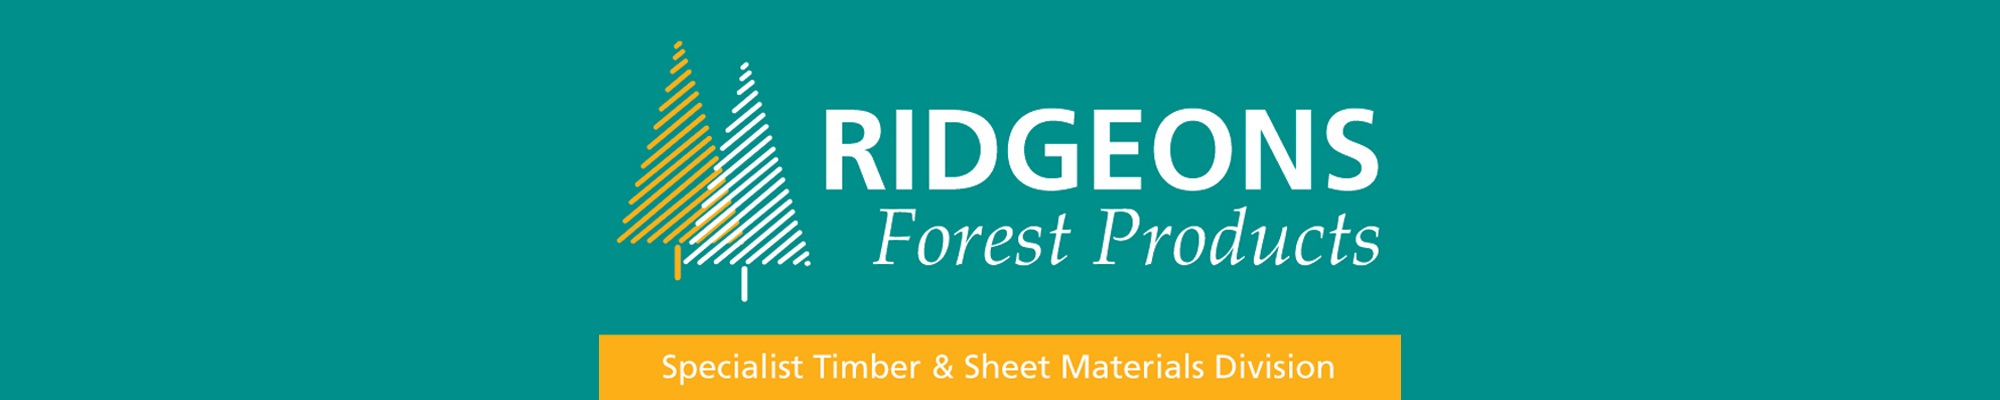 Ridgeons Forest Products